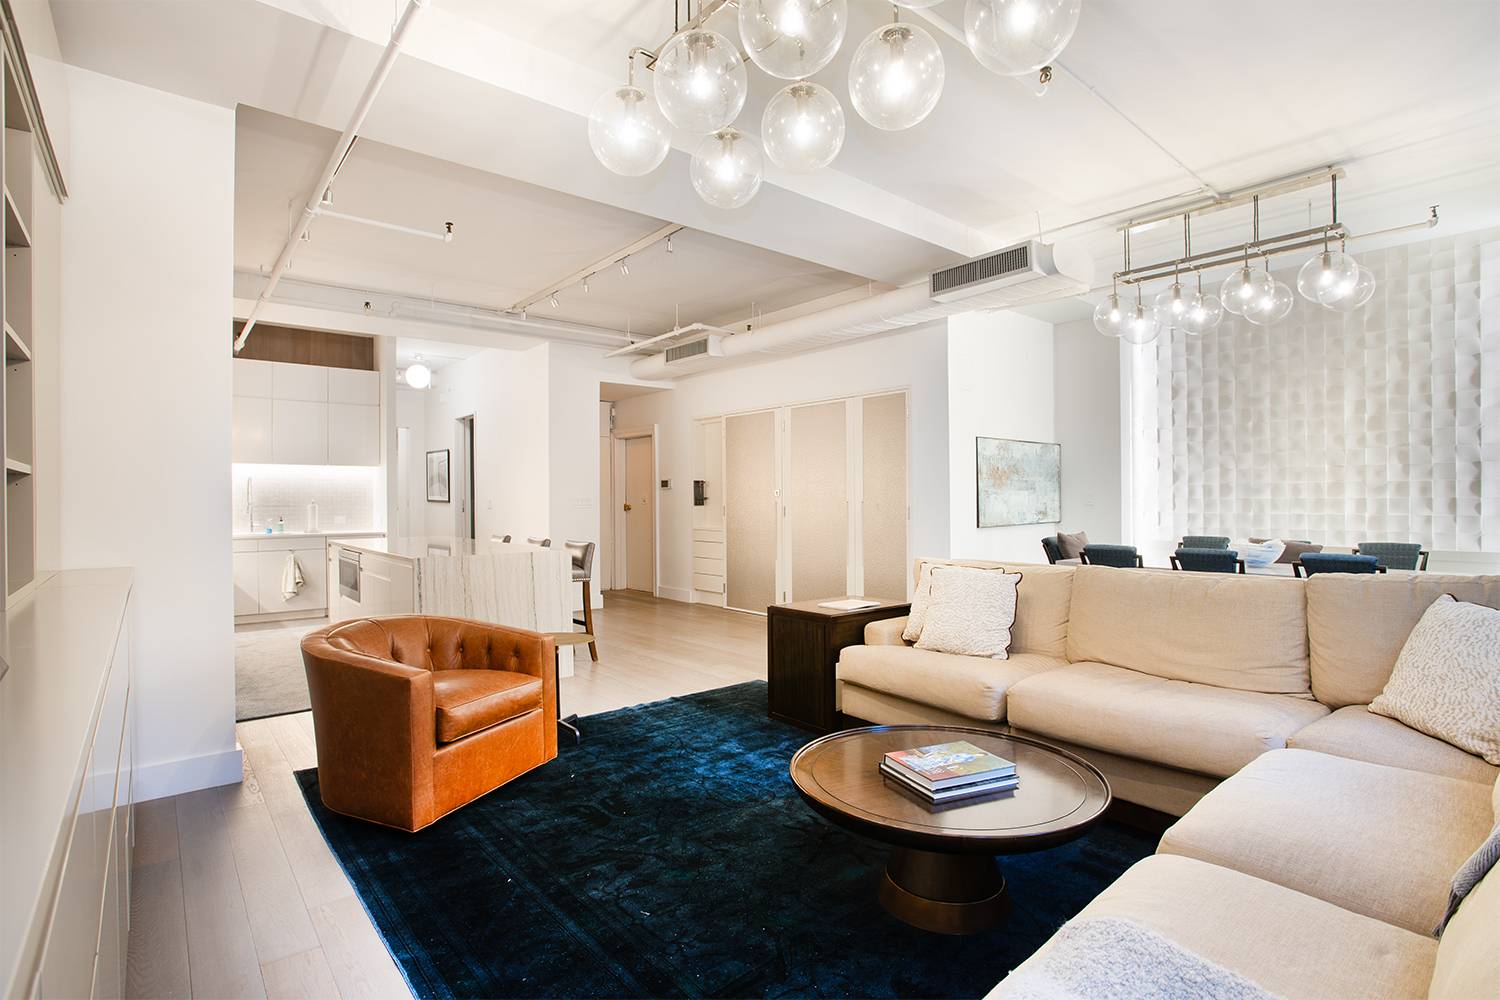 FURNISHED Rental Luxury loft living at its finest in the heart of the Flatiron District.